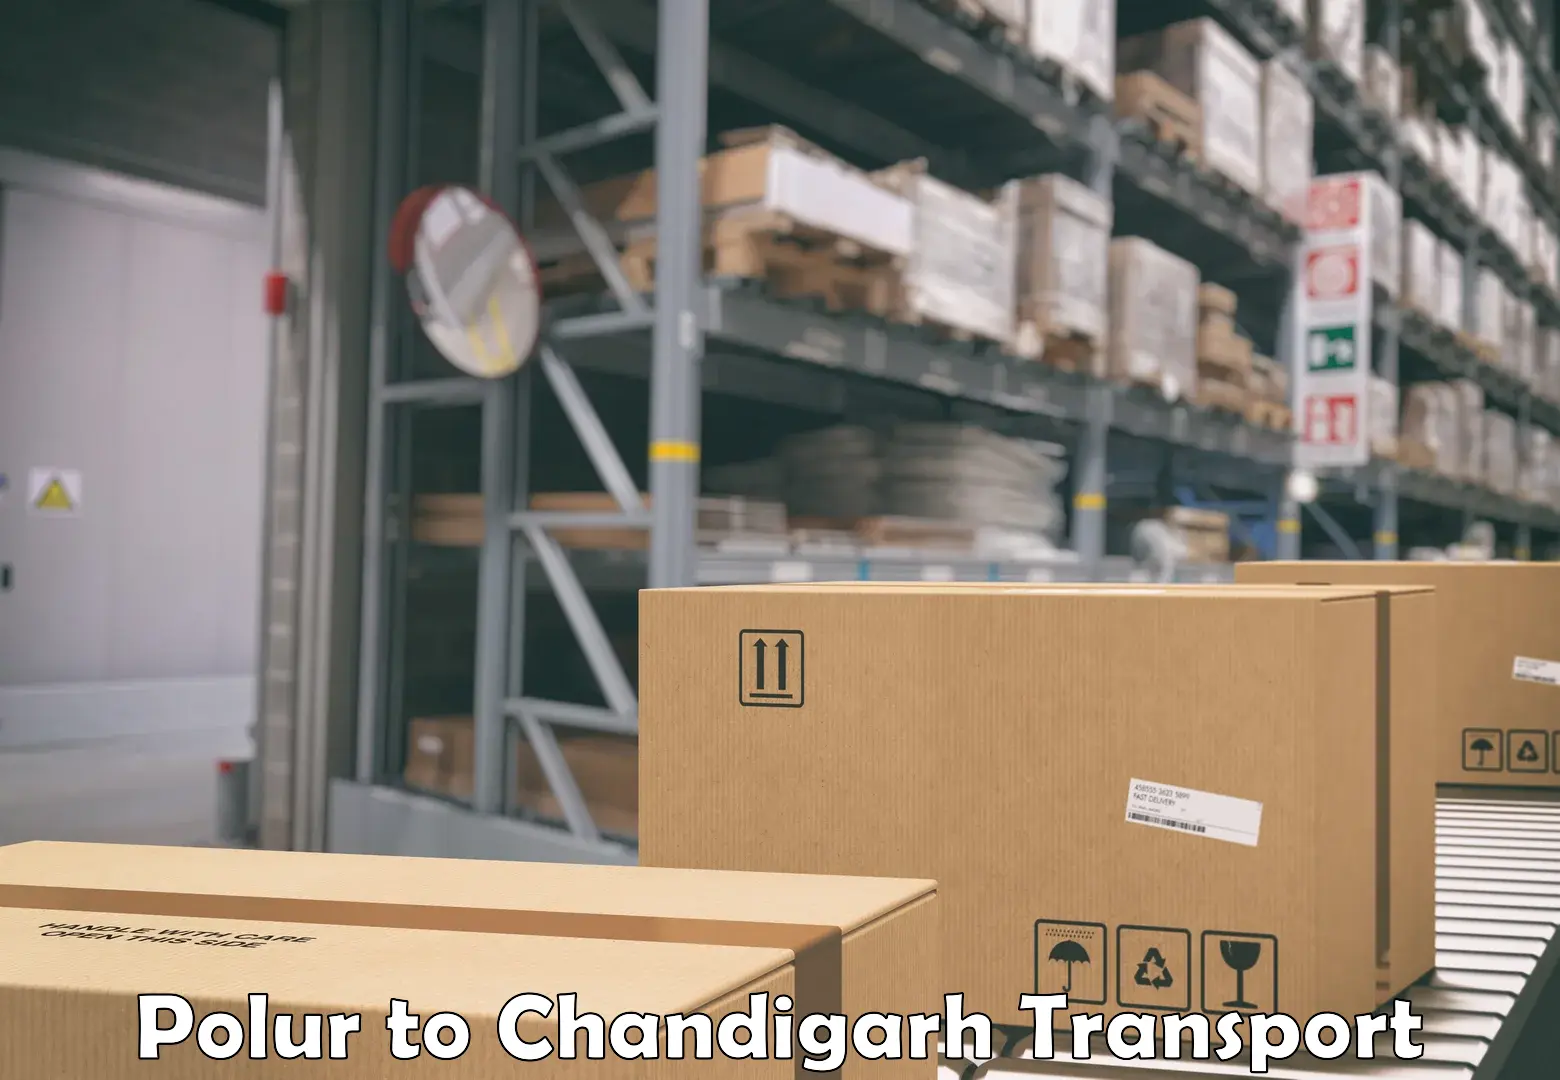 Luggage transport services Polur to Chandigarh